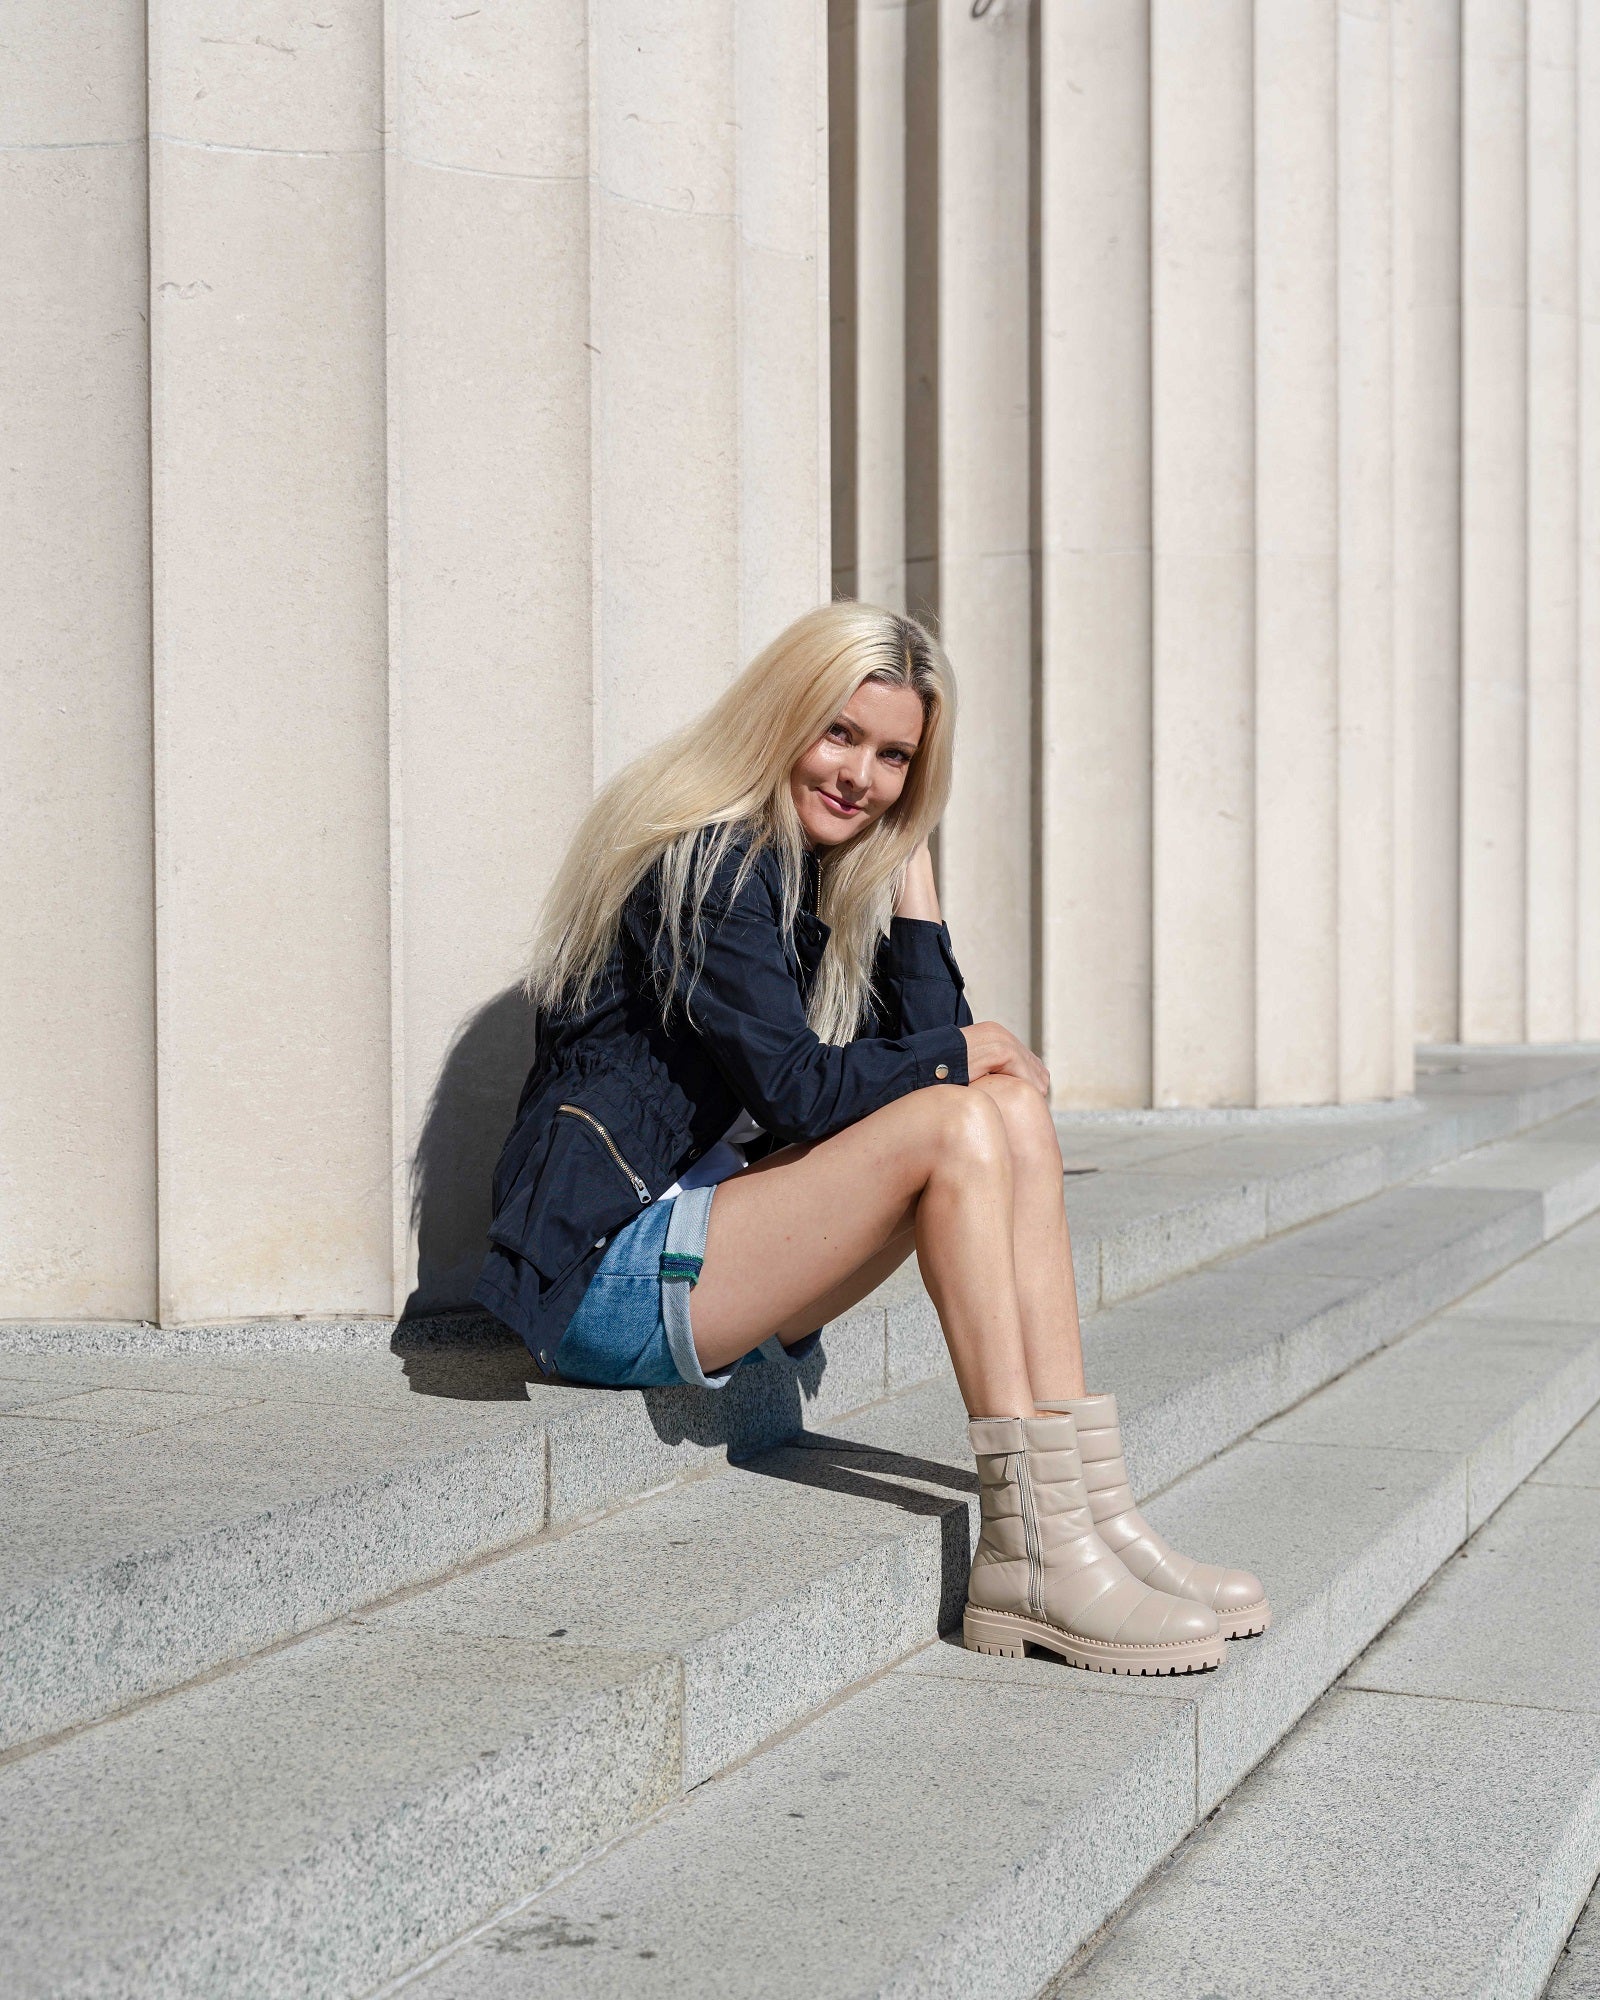 Olivia Combat Boot Cream Boots by Sole Shoes NZ AB15-36